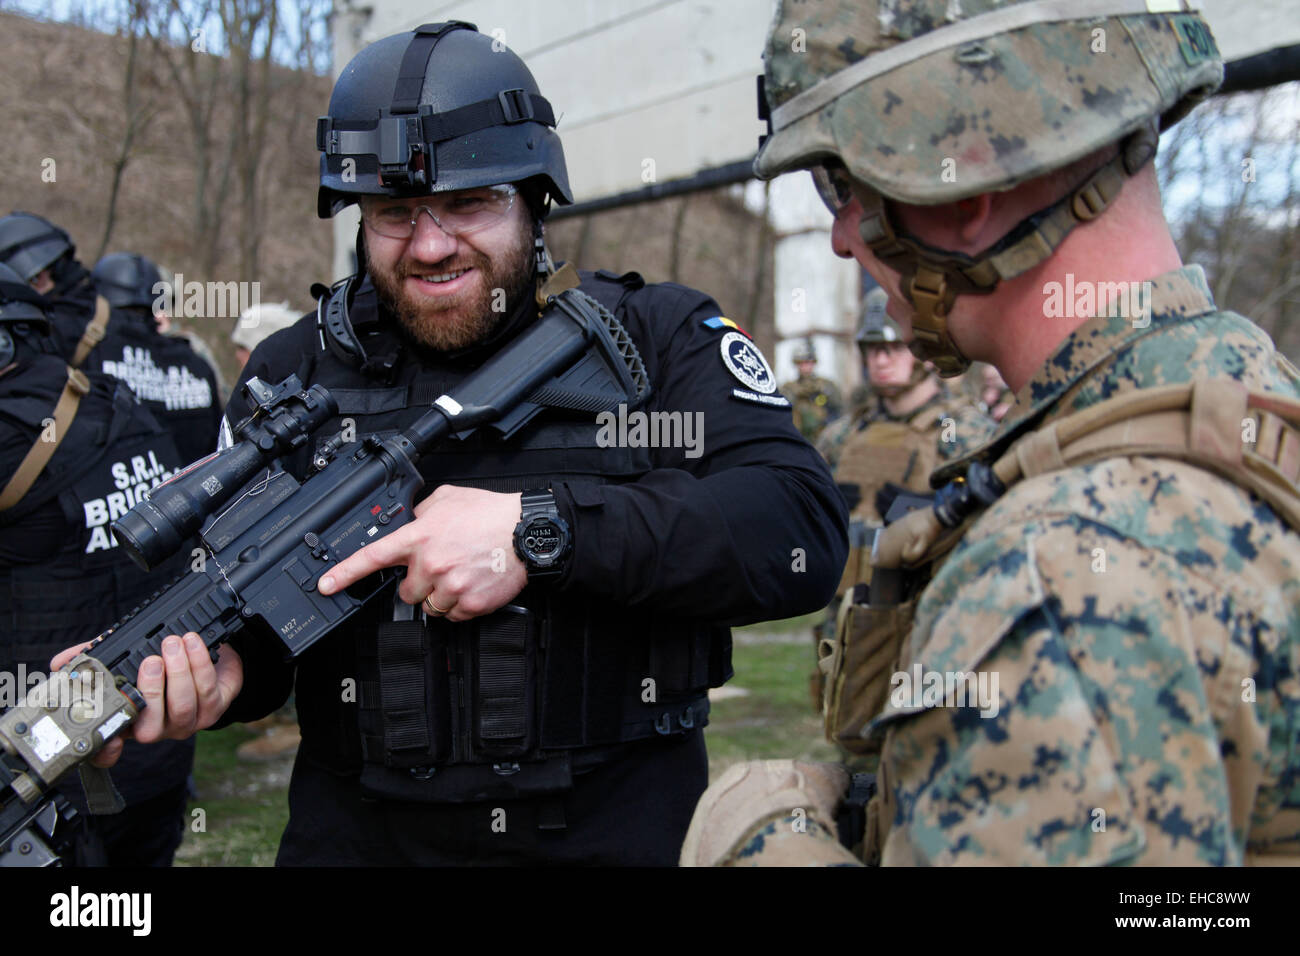 A US Marine explains the operation of an M27 automatic rifle to a member of the Romanian Jandarmeria at the Romanian intelligence service shooting range February 26, 2015 in Bucharest, Romania. Stock Photo